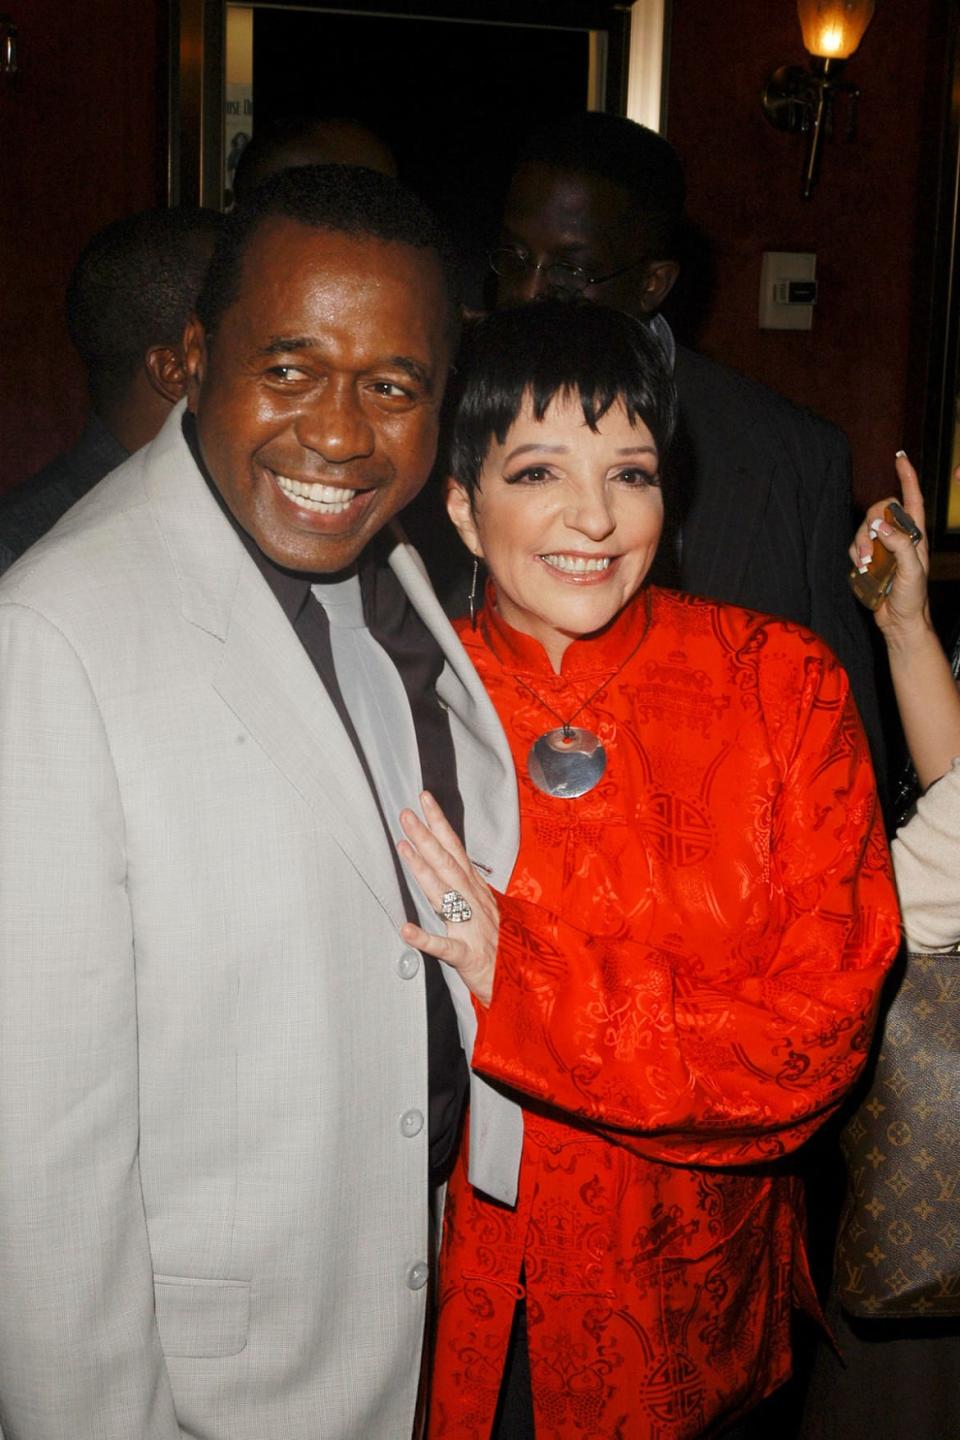 <div class="inline-image__caption"><p>Ben Vereen and Liza Minnelli attend the Idlewild premiere at Ziegfeld Theatre on August 21, 2006 in New York City.</p></div> <div class="inline-image__credit">Scott Rudd/Patrick McMullan via Getty</div>